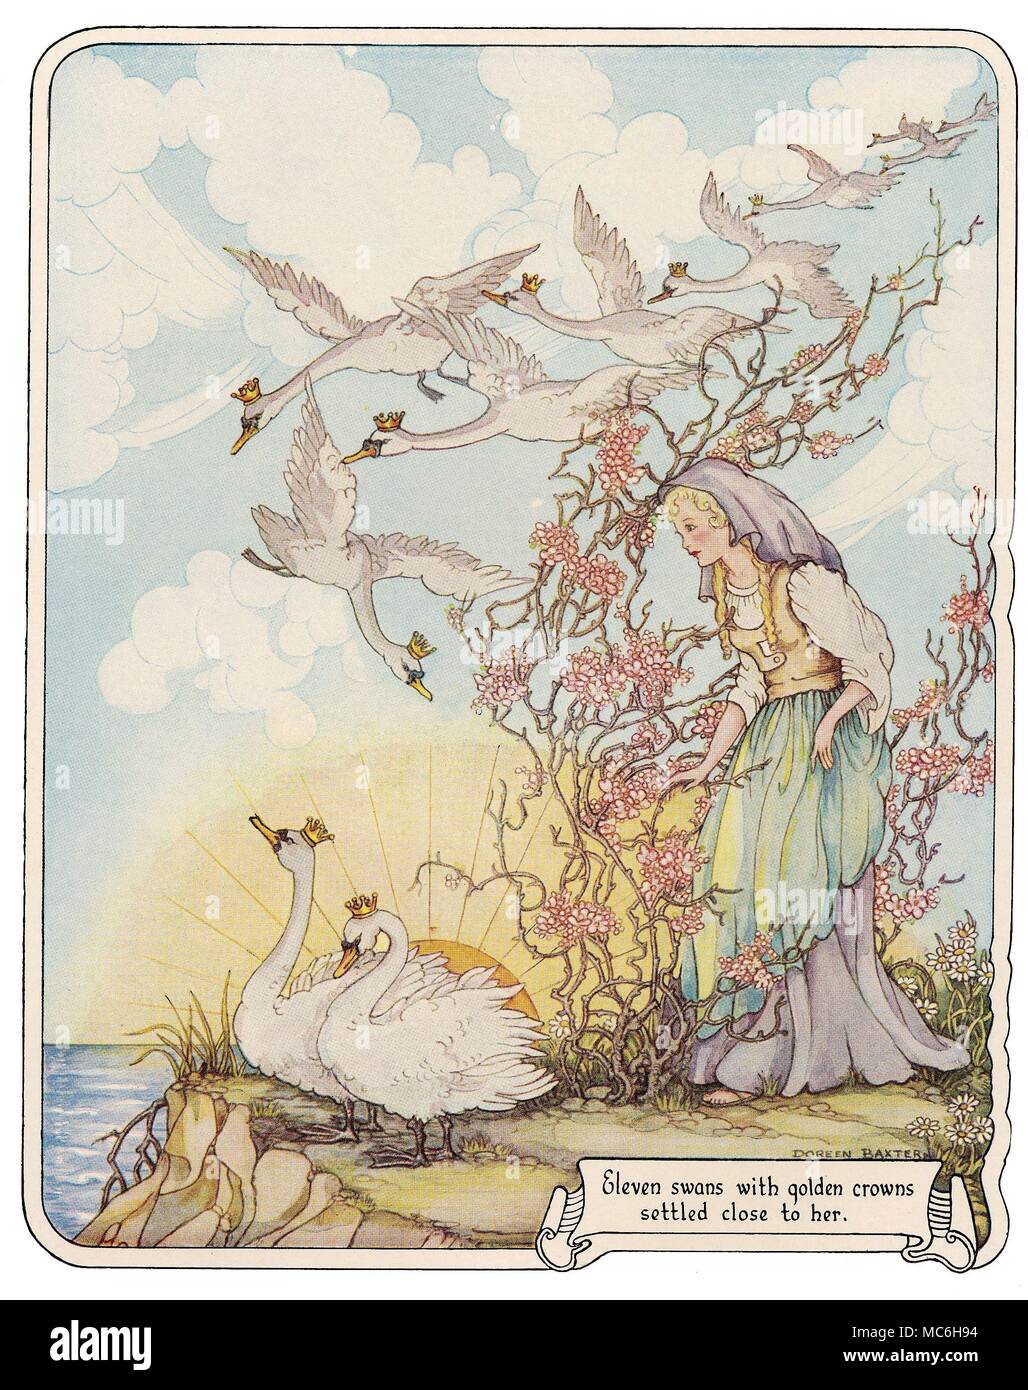 FAIRY TALES - WILD SWANS The eleven wild swans with royal crowns. Illustration by Doreen Baxter, for the tale, The Wild Swans, in The Fairy-Tale Omnibus. Stock Photo